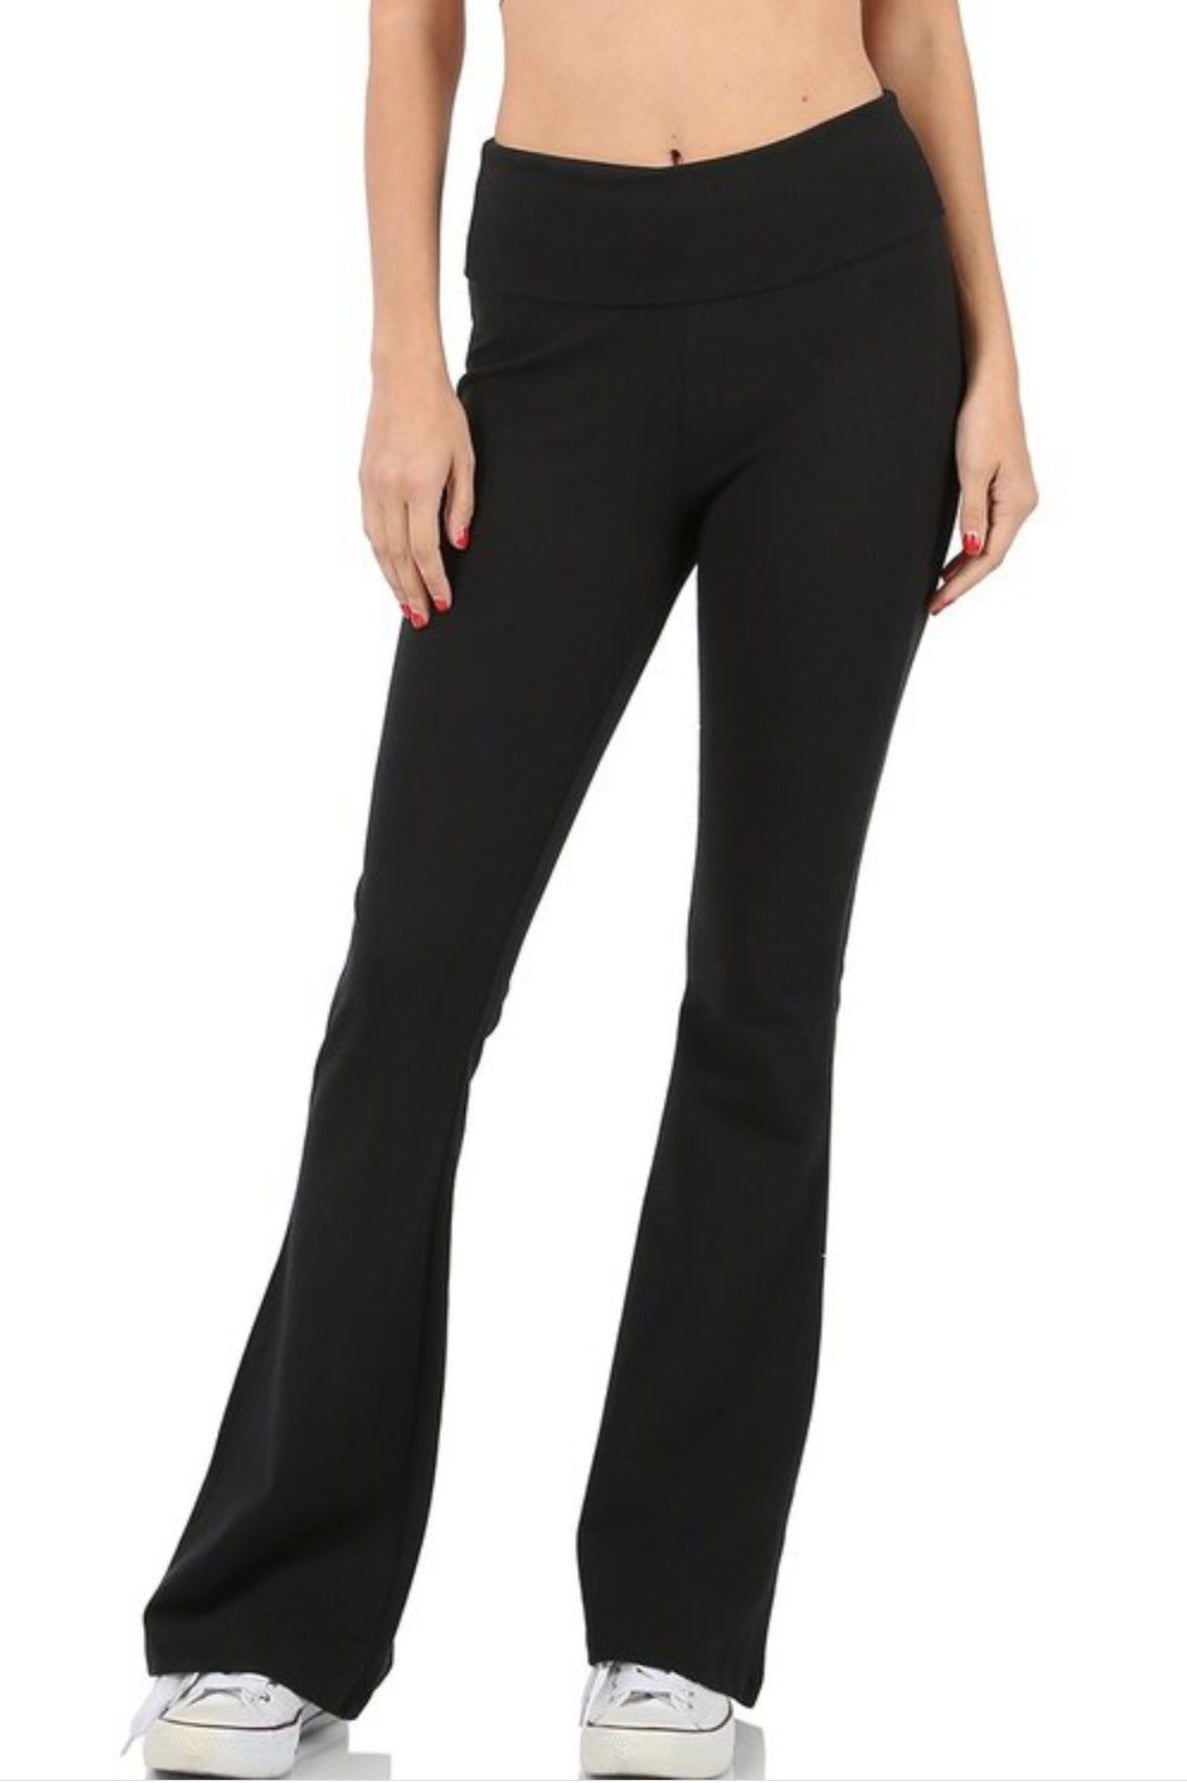 Traci Yoga Pants - Corinne Boutique Family Owned and Operated USA